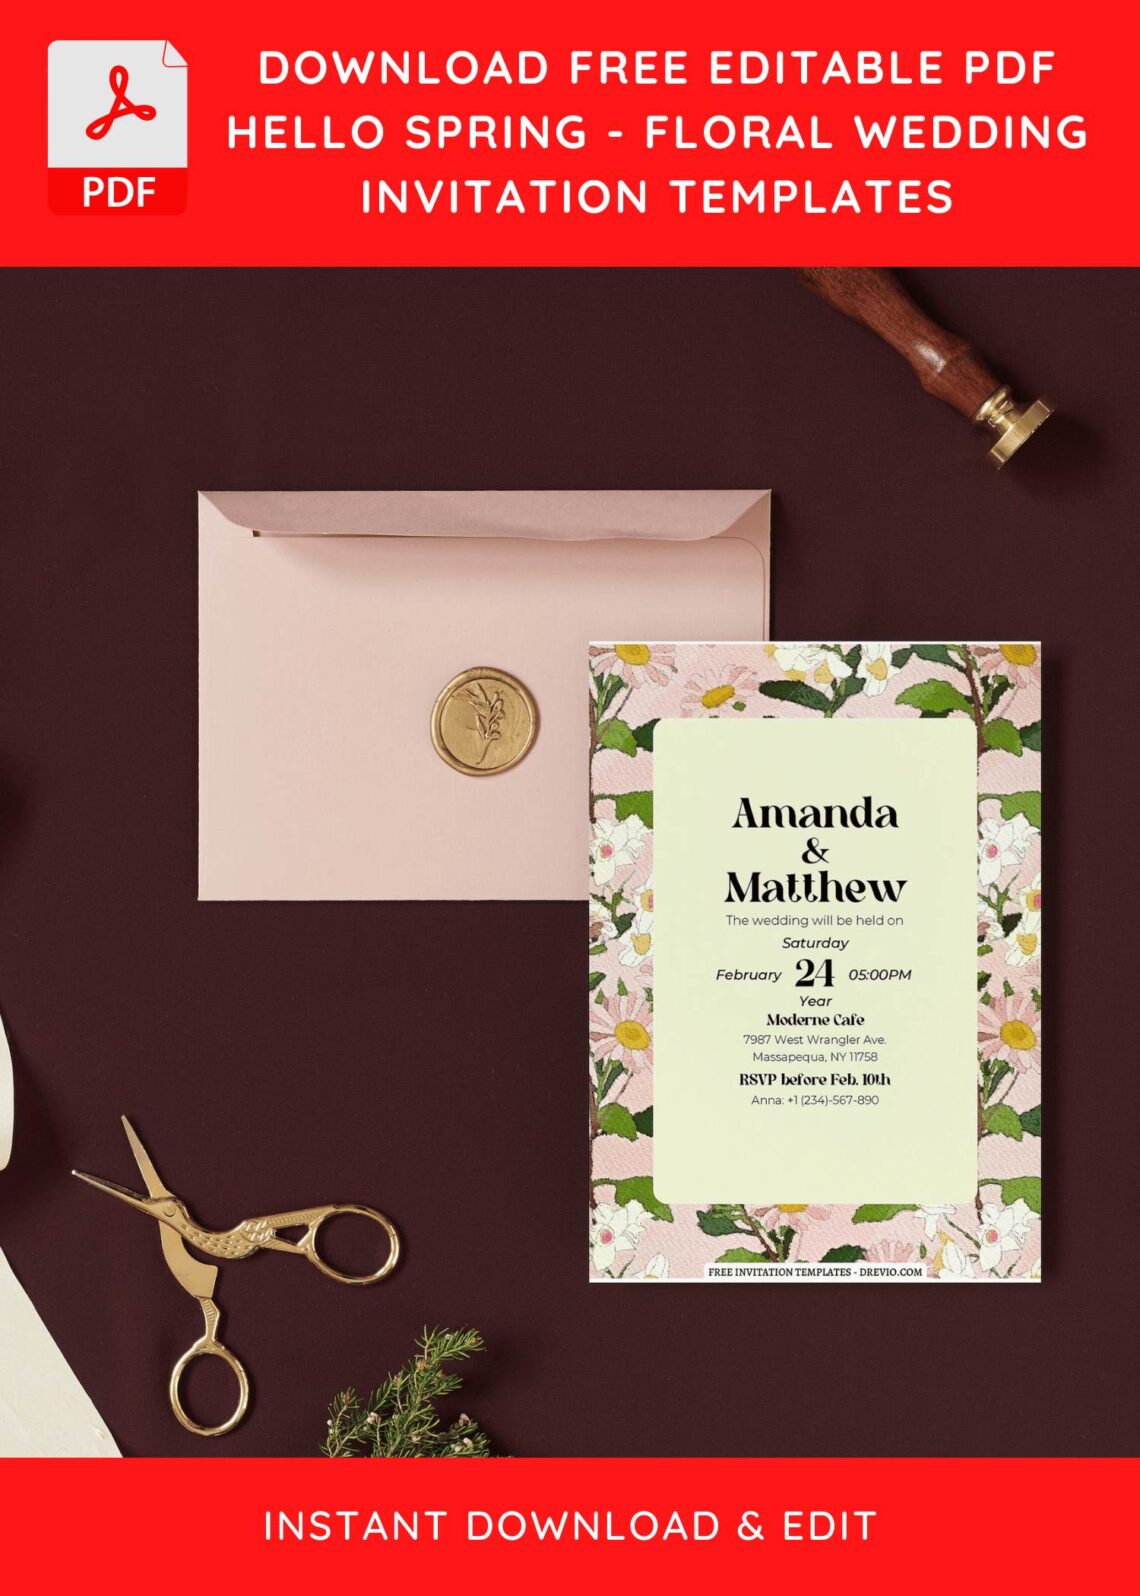 (Free Editable PDF) Hello Spring Floral Wedding Invitation Templates with beautiful lily